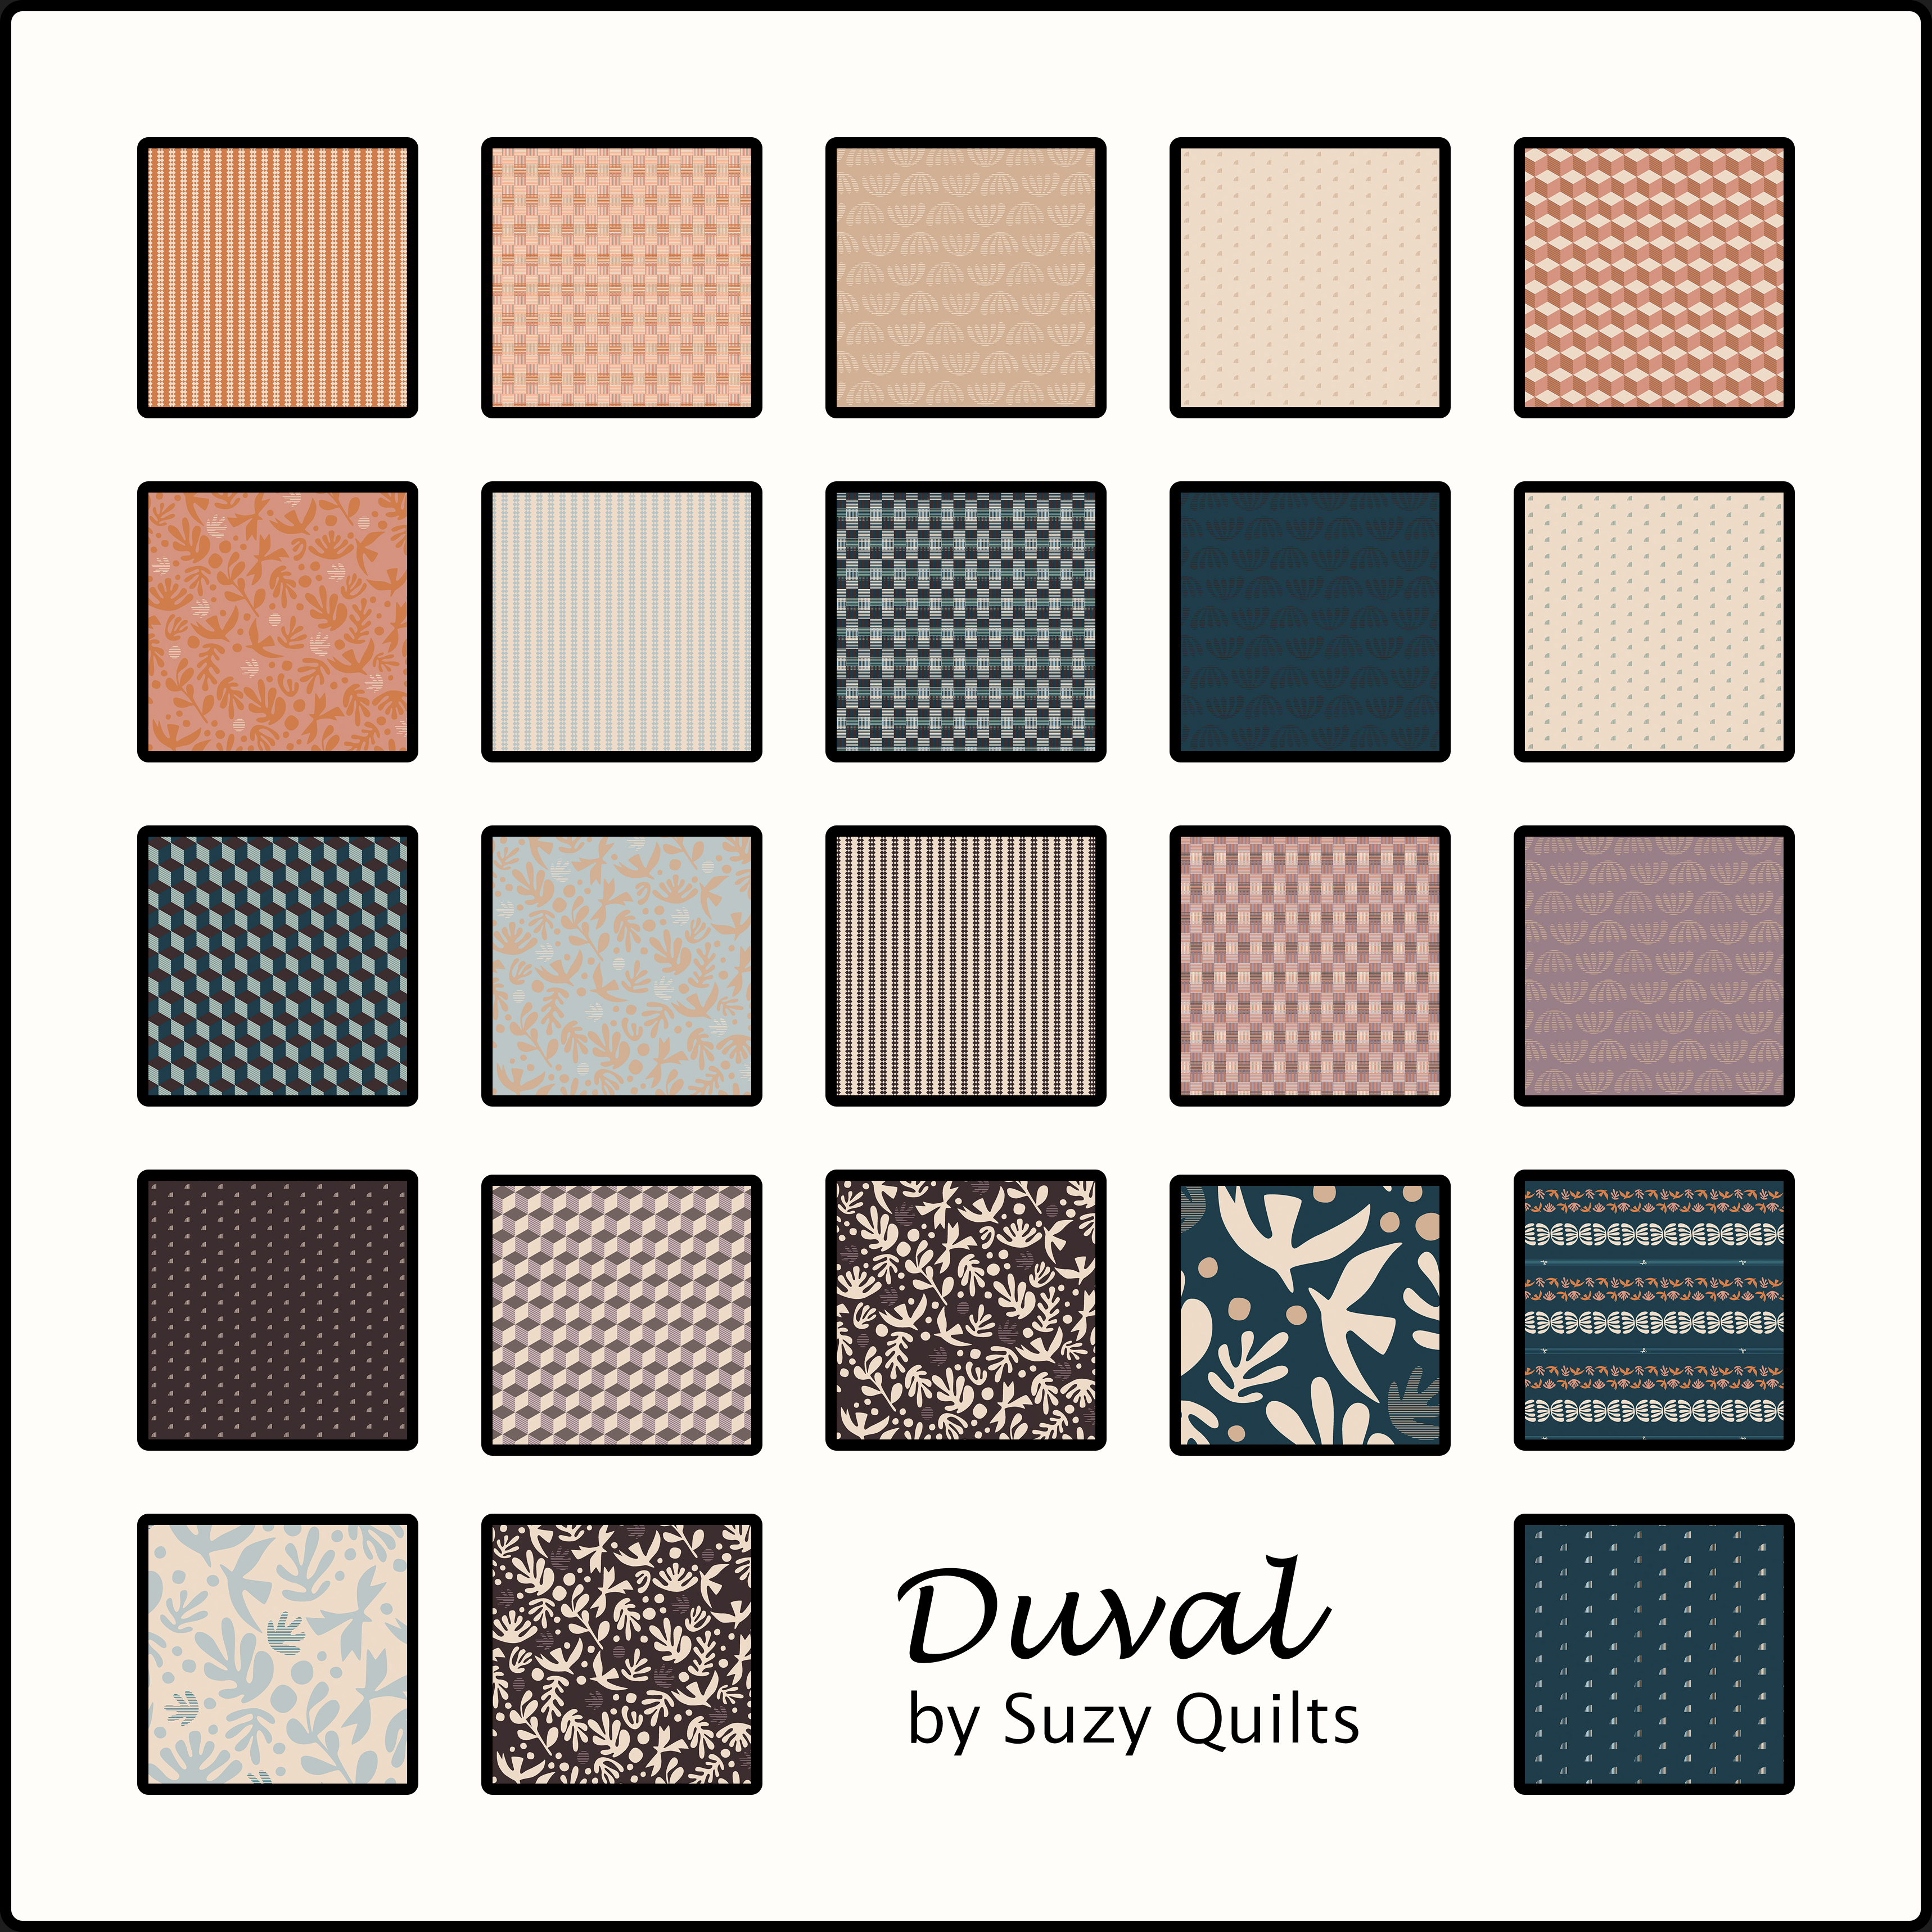 A collage of pictures of the fabric in the Duval bundle Suzy Quilts.